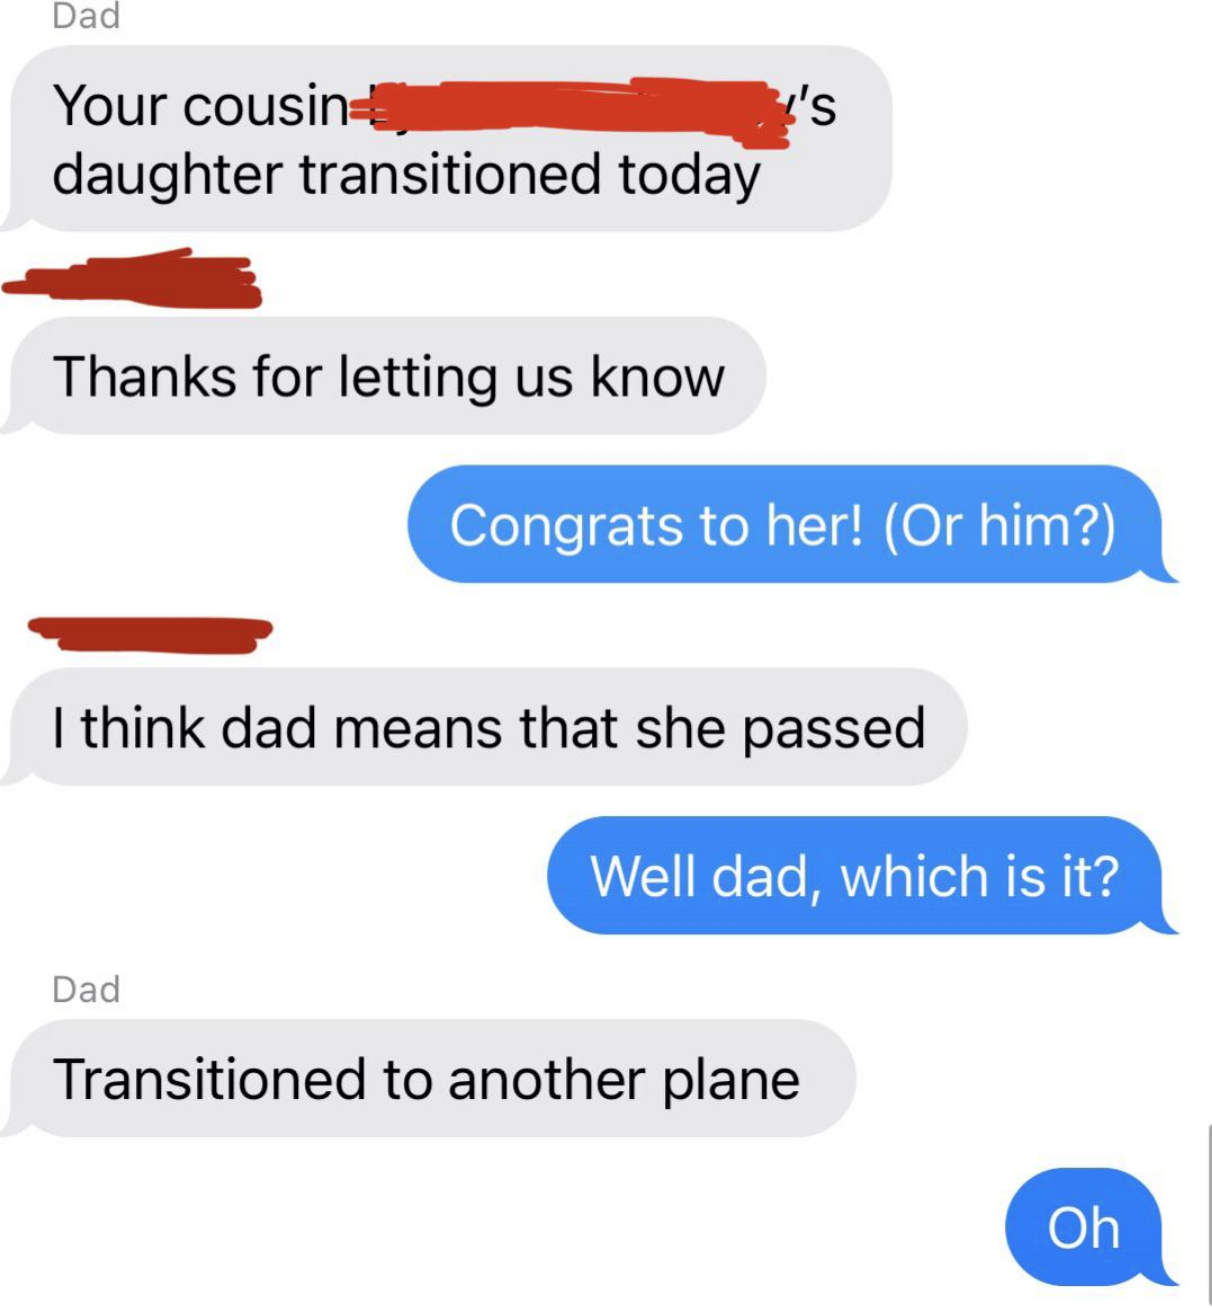 A person&#x27;s dad says someone transitioned today, the person congratulates them, then the person&#x27;s sister clarifies that their dad means the person died